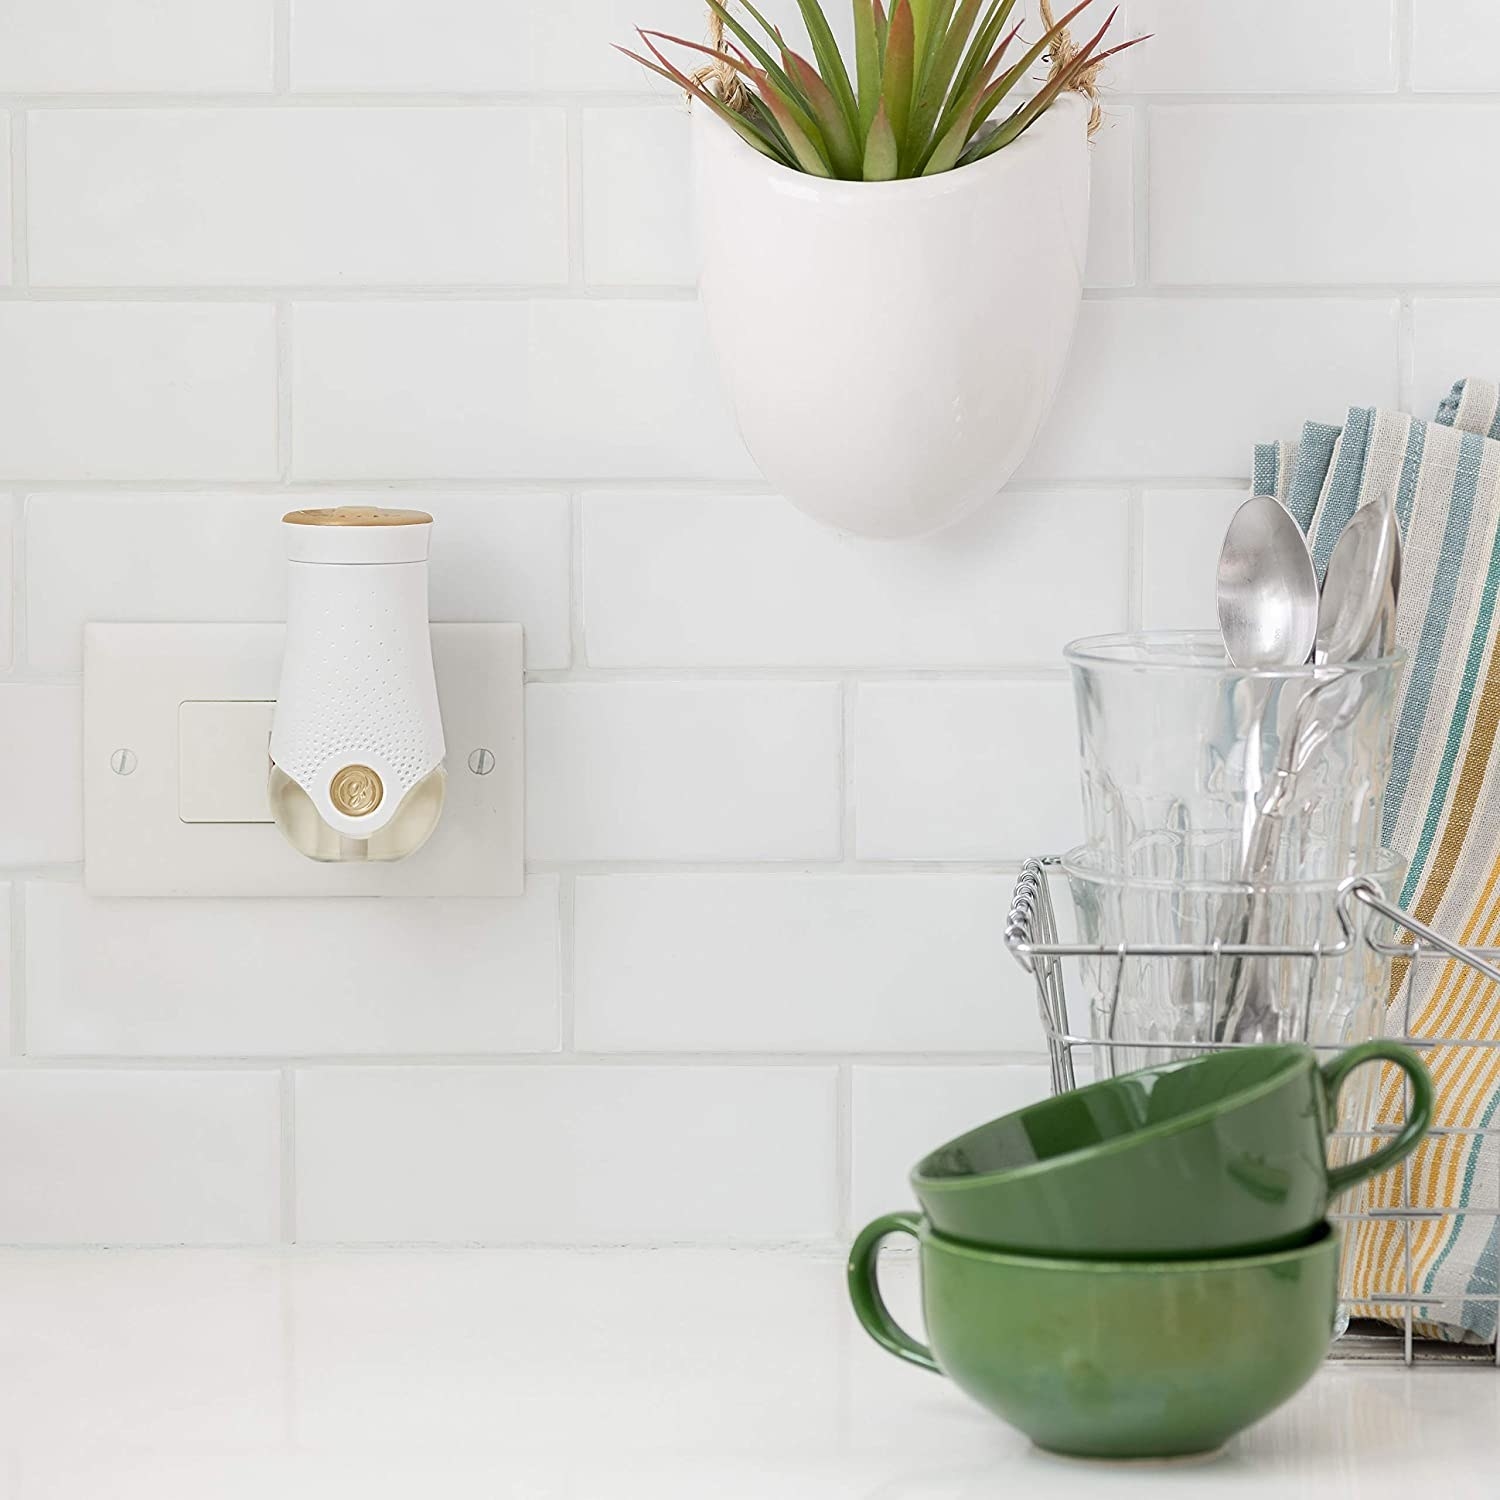 A scented wall plugin to eliminate bathroom odors 